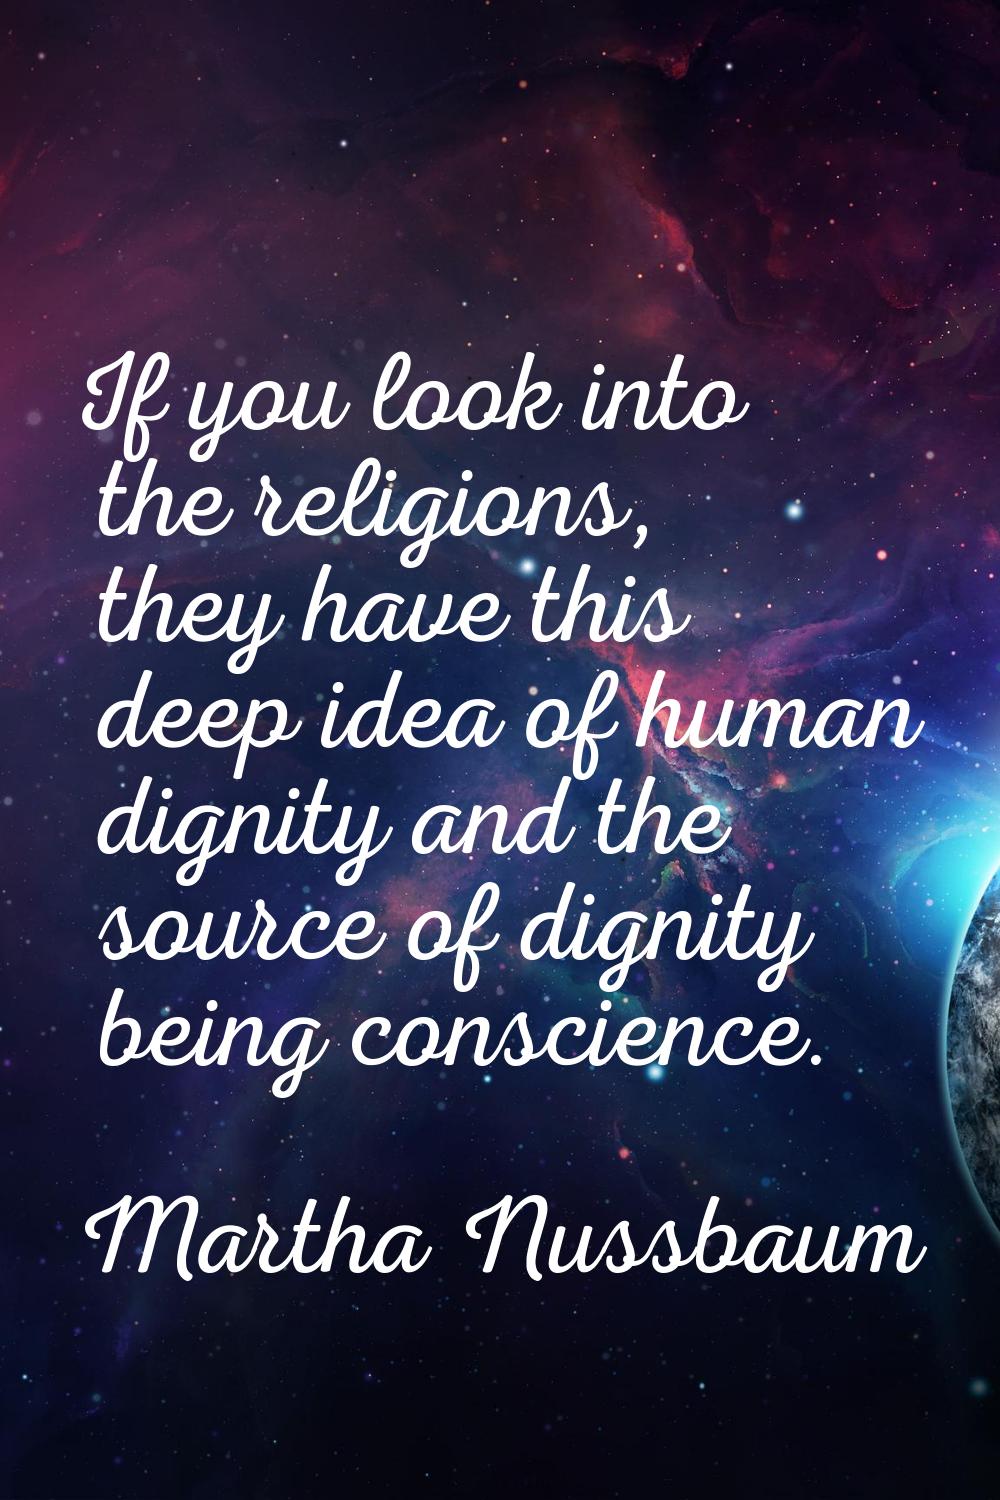 If you look into the religions, they have this deep idea of human dignity and the source of dignity